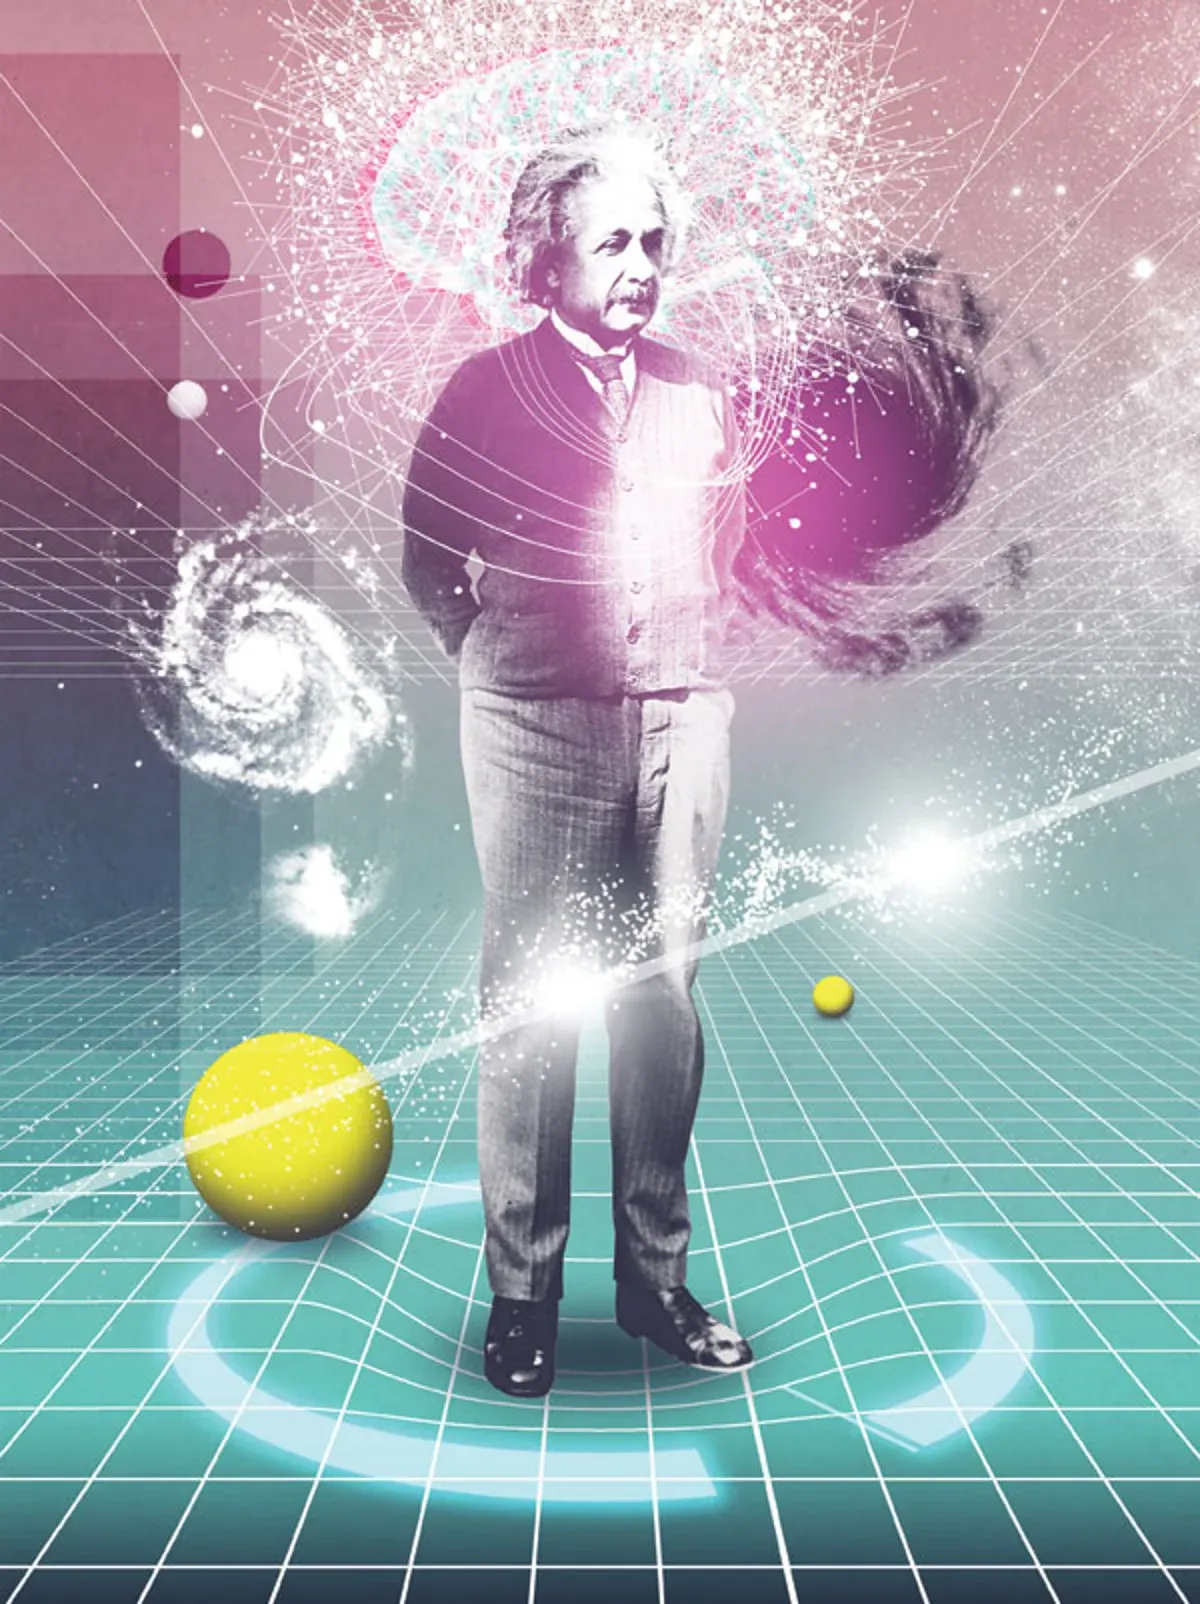 The Radiant Glory of a Jewish Einstein: The Journey From Adversity To Genius